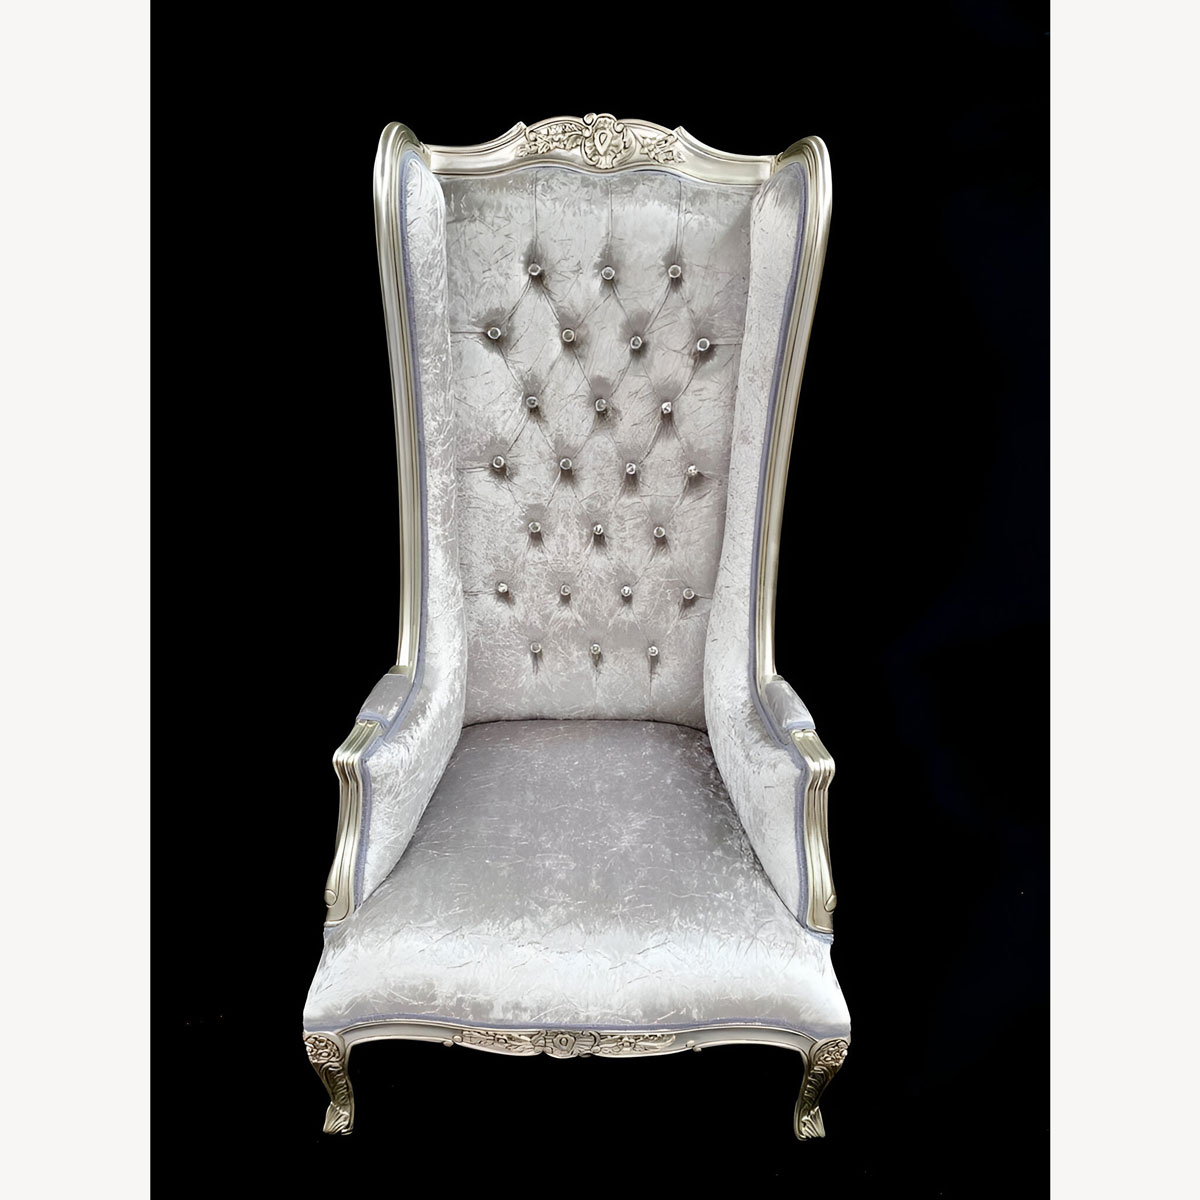 Silver Leaf Ornate Feature High Back Porters Arm Throne Chair In Silver Grey Crushed Velvet Crystal Buttons 1 - Hampshire Barn Interiors - Silver Leaf Ornate Feature High Back Porters Arm Throne Chair In Silver Grey Crushed Velvet Crystal Buttons -